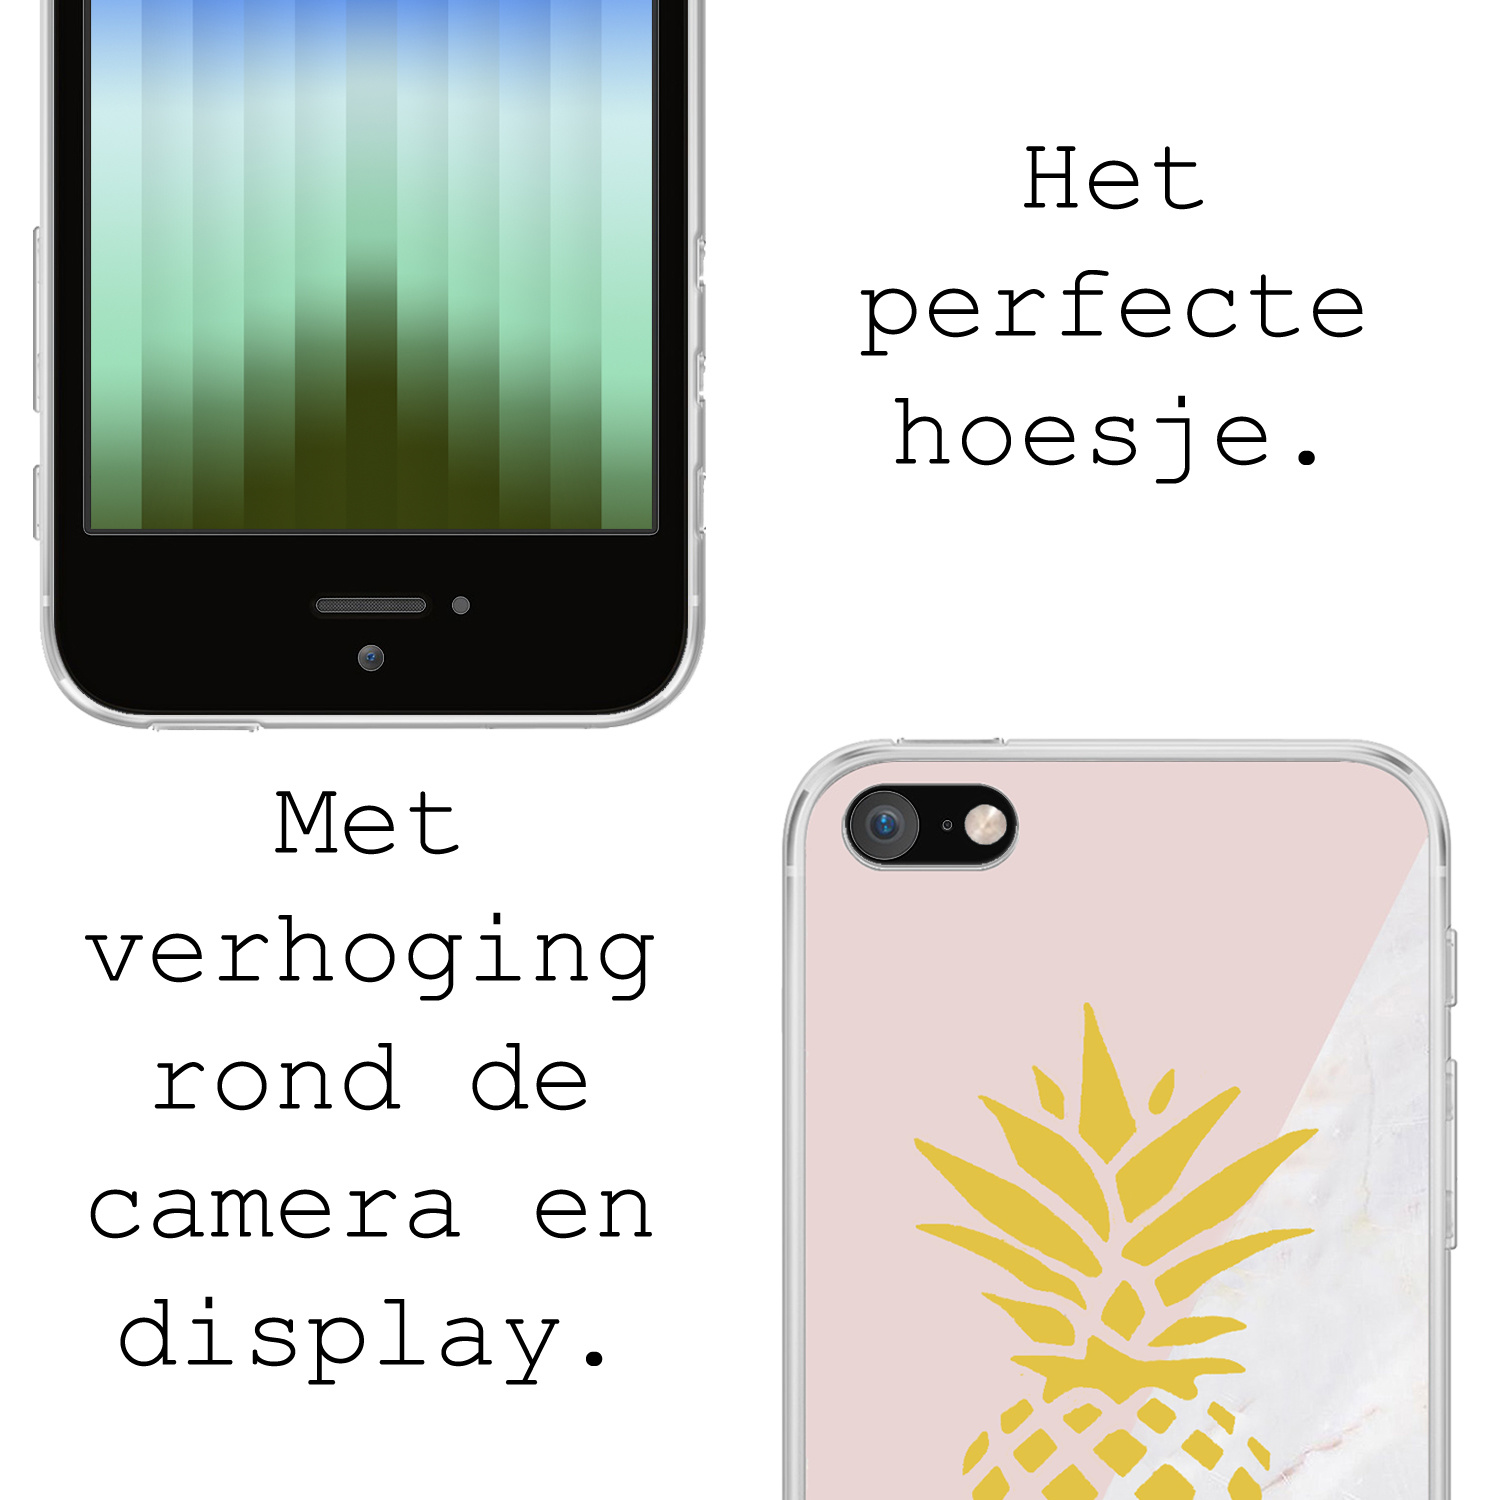 BASEY. Hoes geschikt voor iPhone SE 2022 Hoesje Siliconen Back Cover Case - iPhone SE 2022 Hoes Silicone Case Hoesje - Ananas - 2 Stuks